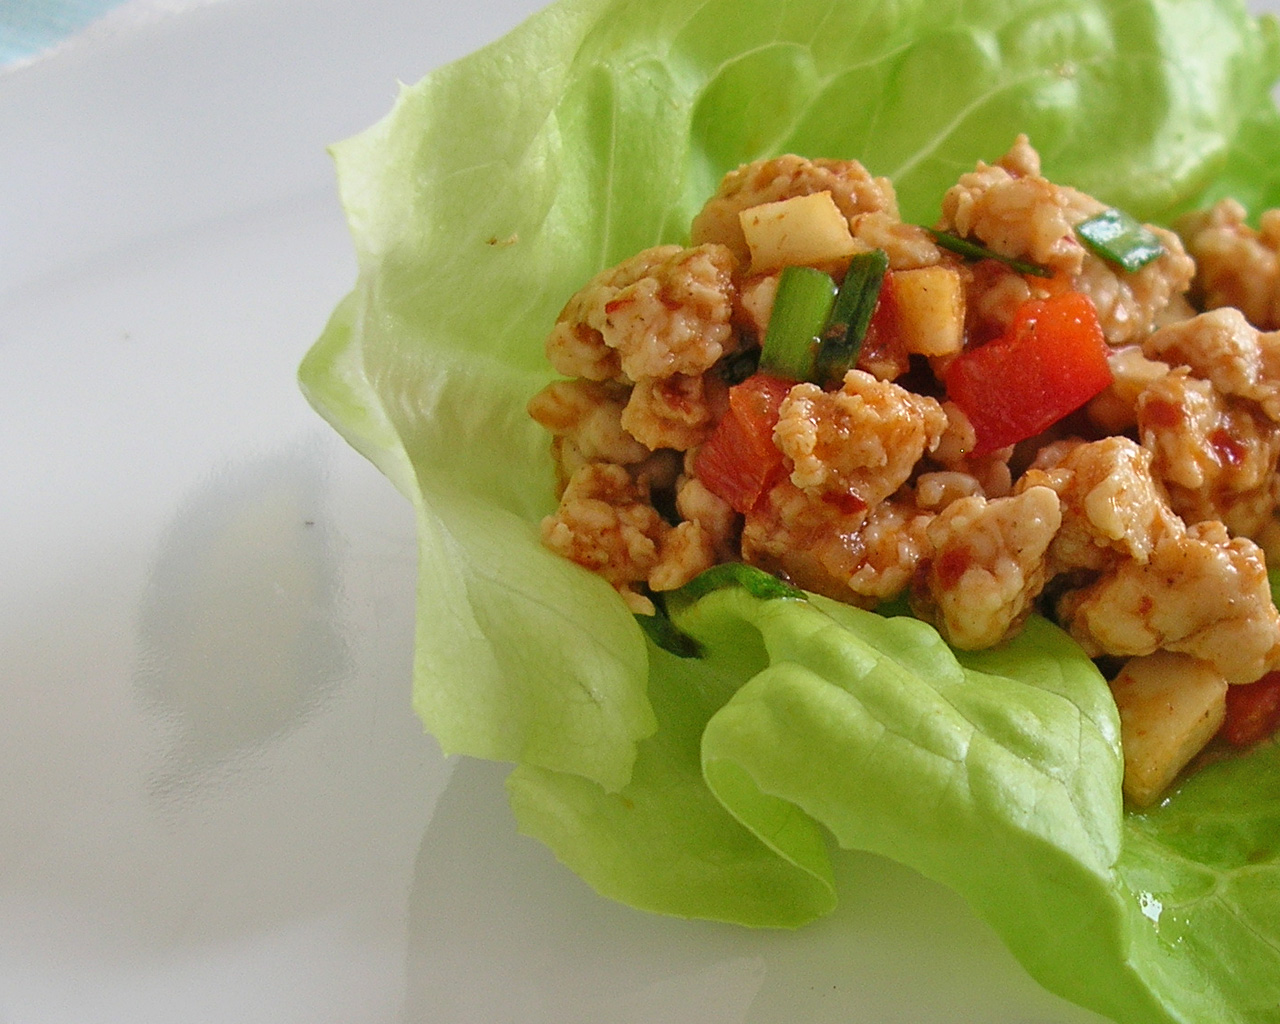 Minced pork with water chestnut in lettuce cups